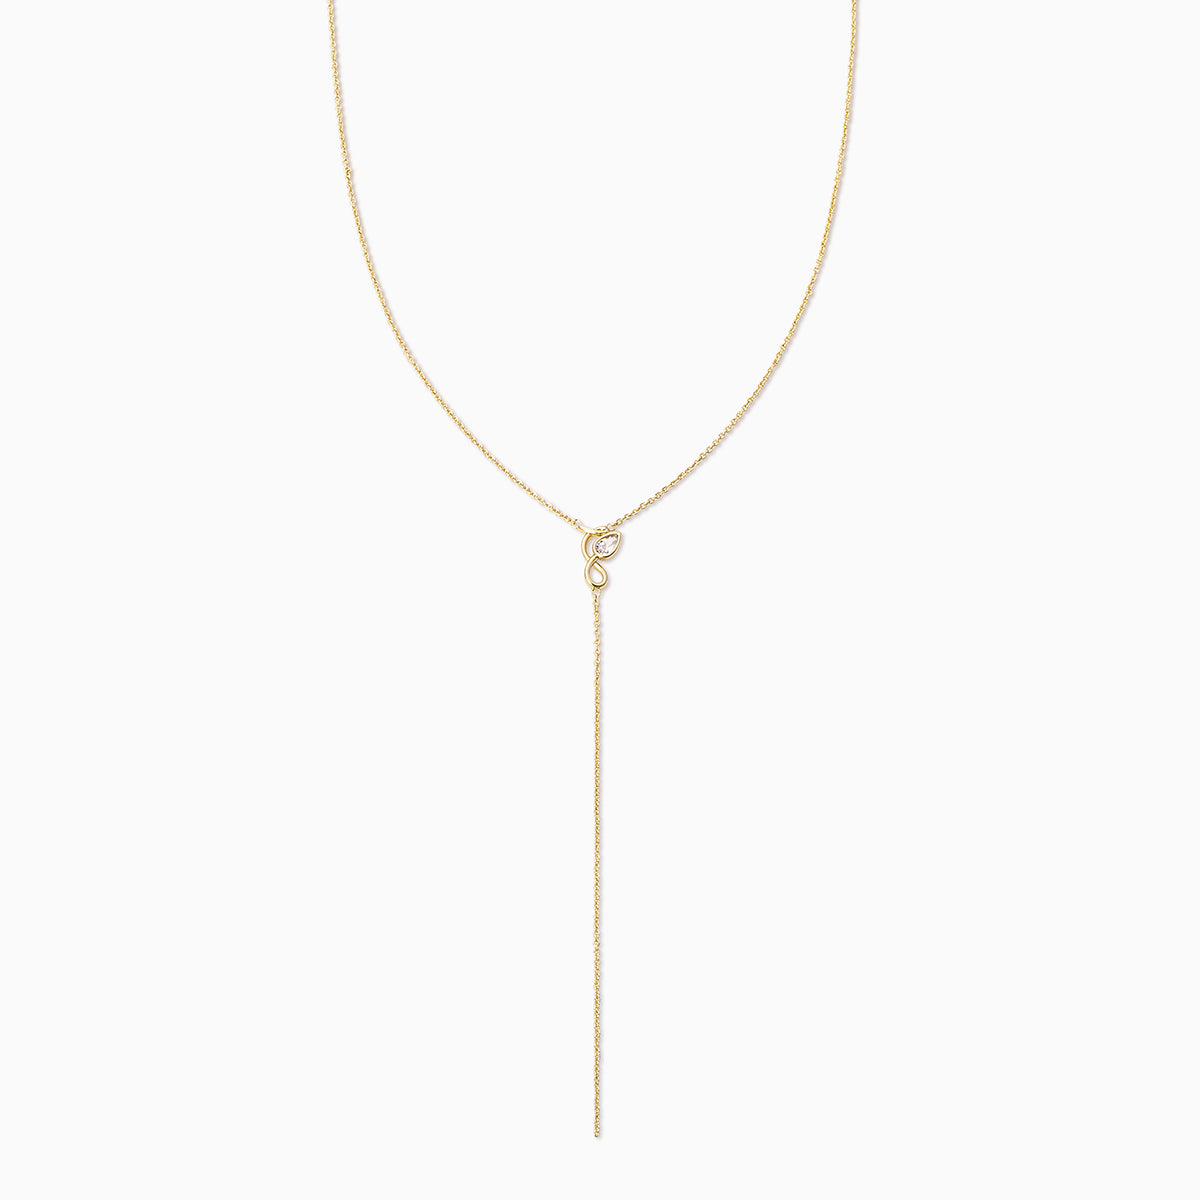 Long Y Necklace Wrap Around Necklace Gold Necklace Lariat Necklace Gold Y  Necklace Layering Necklace Y Necklace Long Necklace 